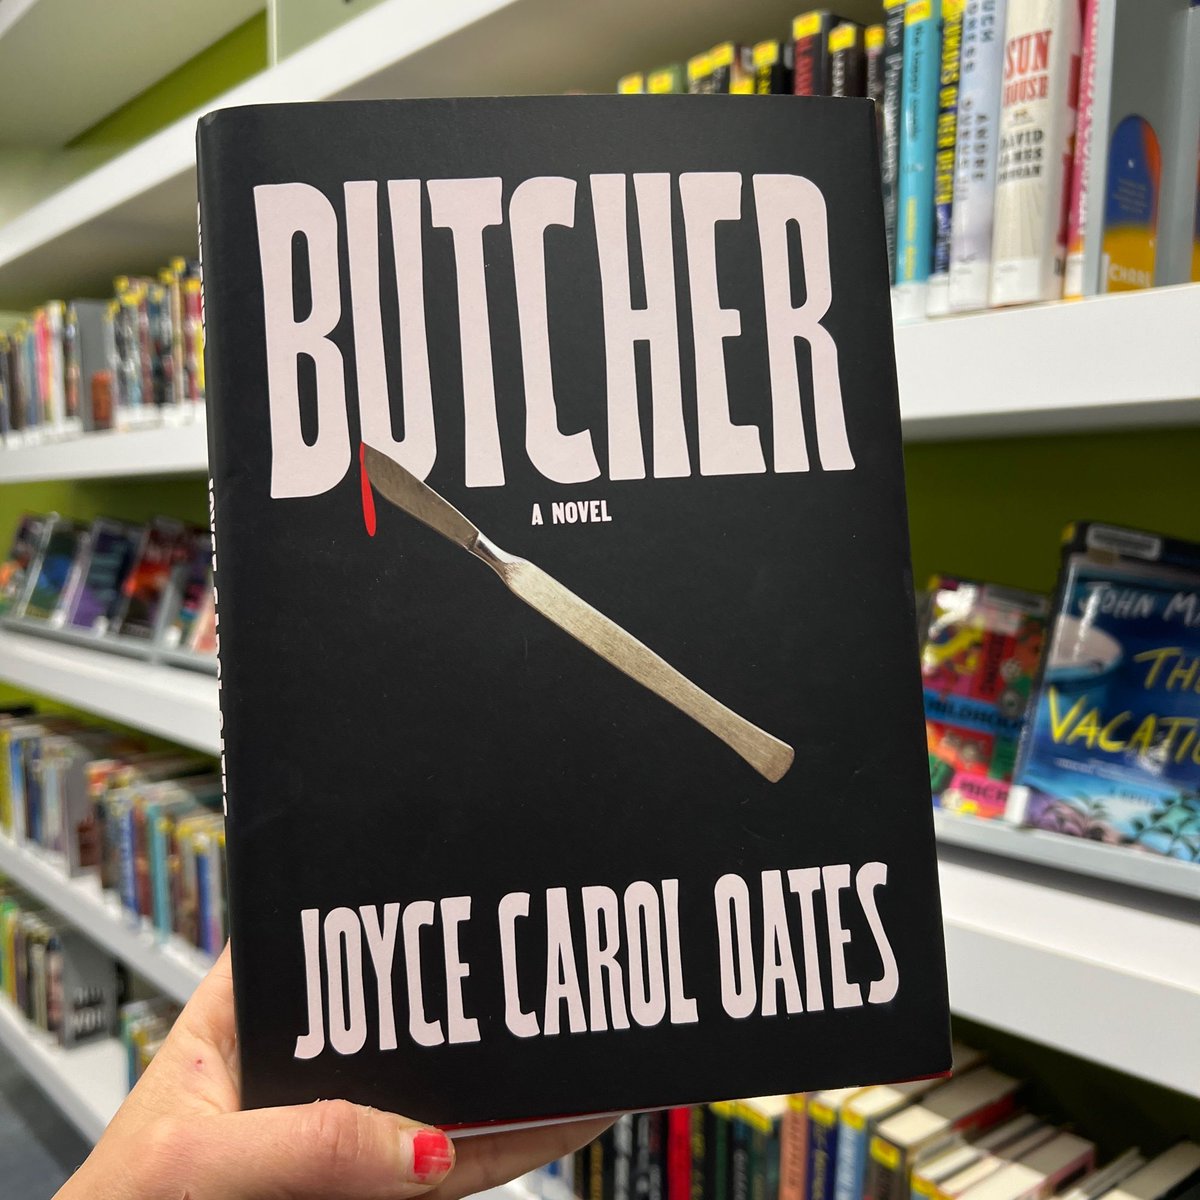 Happy pub day to AViD author Joyce Carol Oates! Check out her new book Butcher, and make plans to meet this legendary author on Thursday, May 30 at Central Library. dmpl.org/joyce-carol-oa…